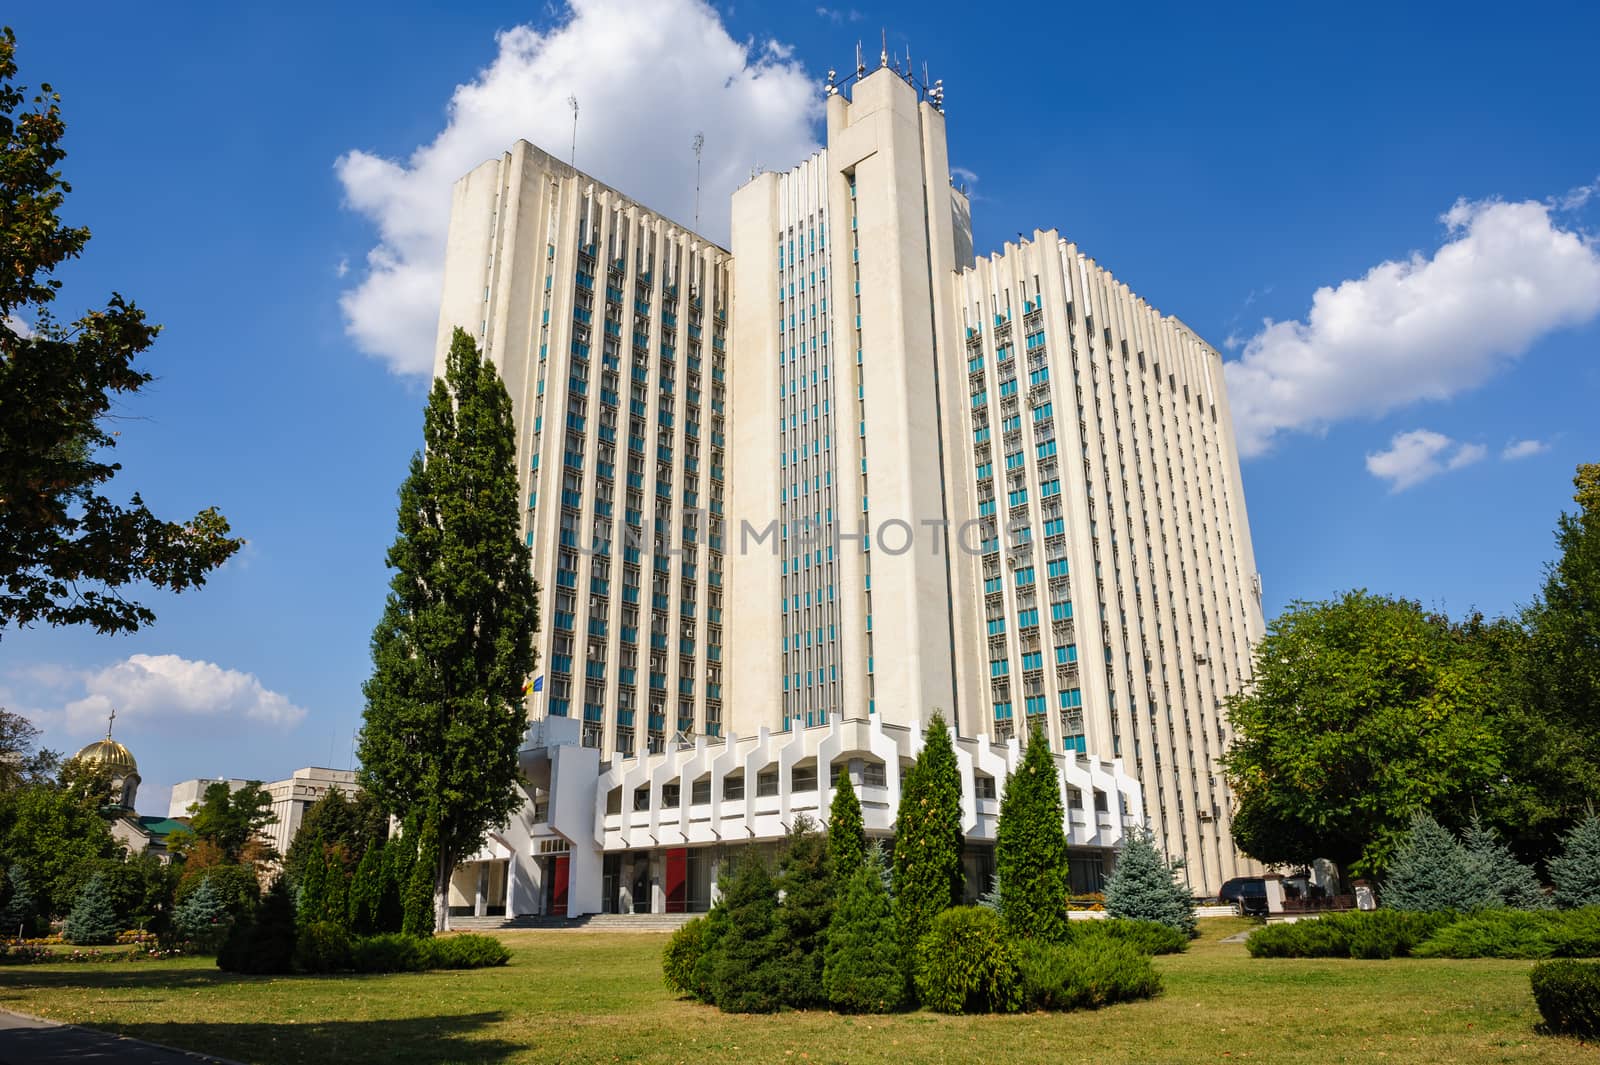 Authorithy building in Chisinau, Moldova by starush